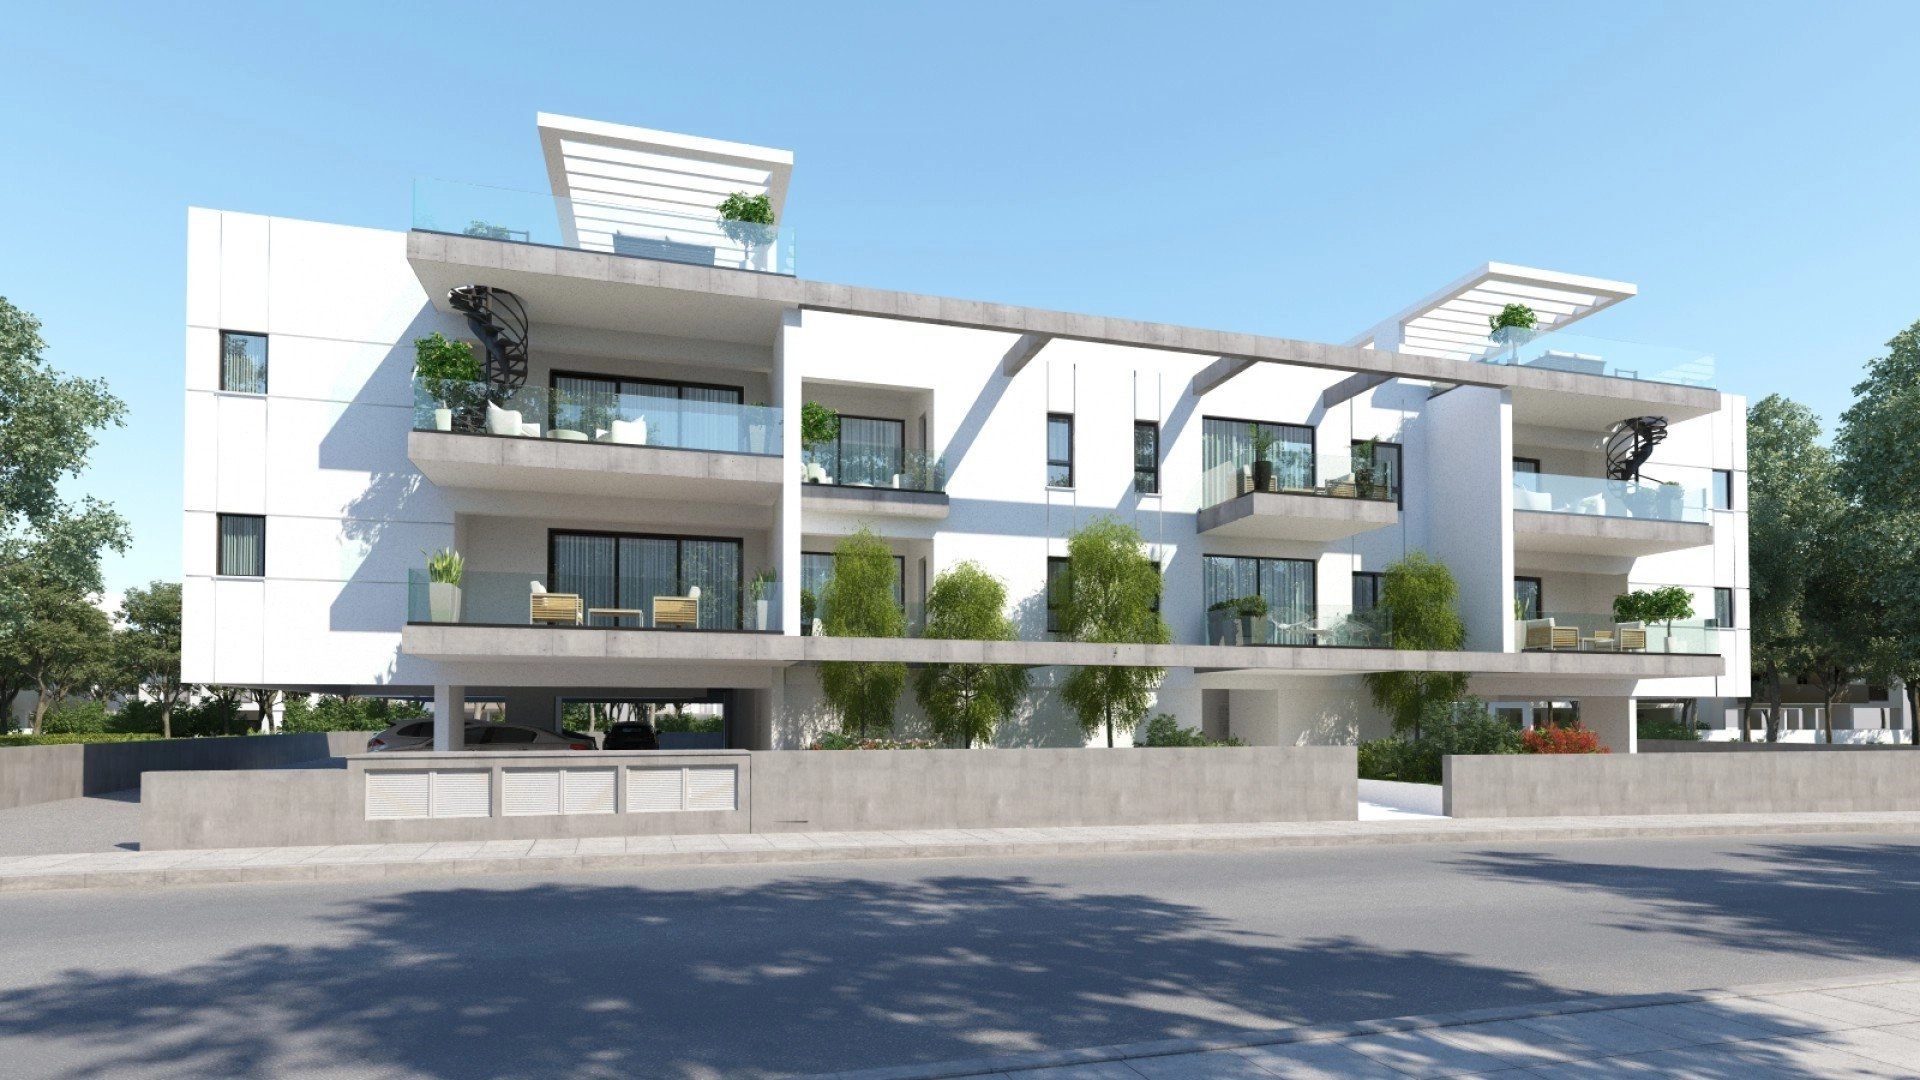 2 Bedroom Apartment for Sale in Asomatos, Limassol District